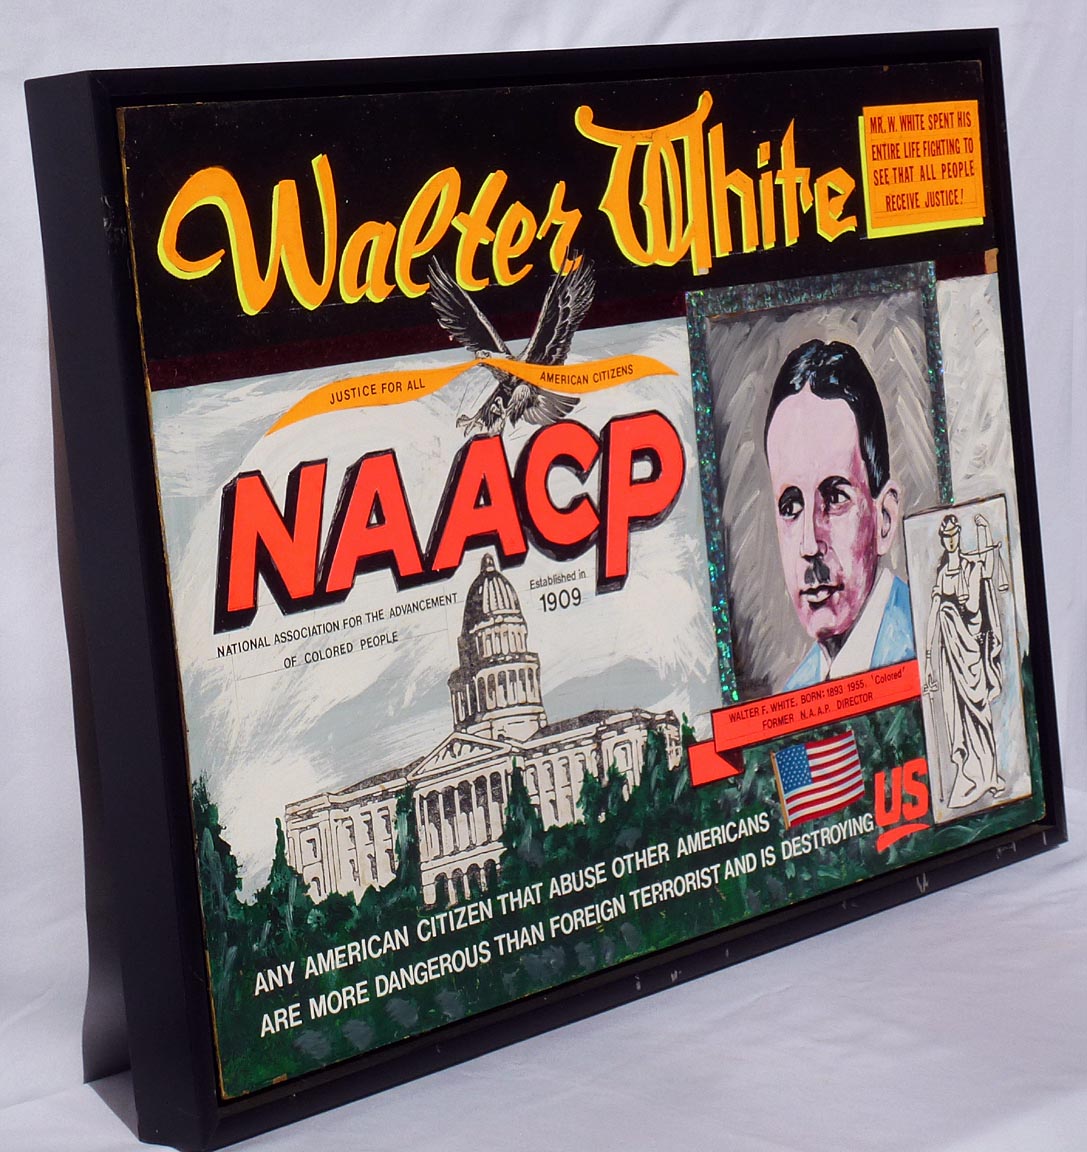 NAACP art by Ed Welch